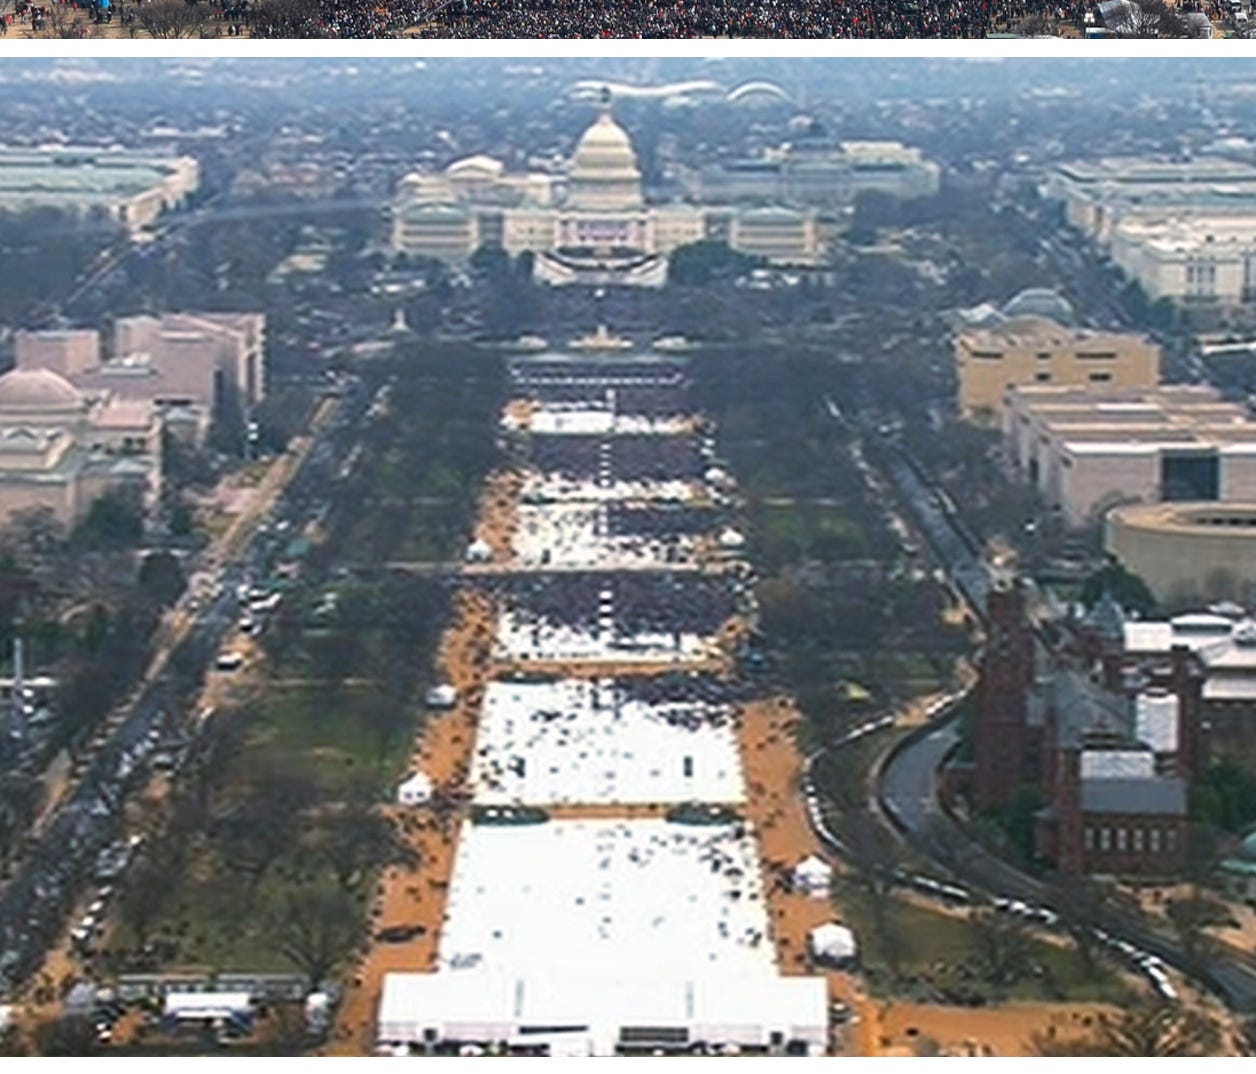 The National Park service released photos from President Trump's inauguration and former president Barack Obama's two inaugurations.